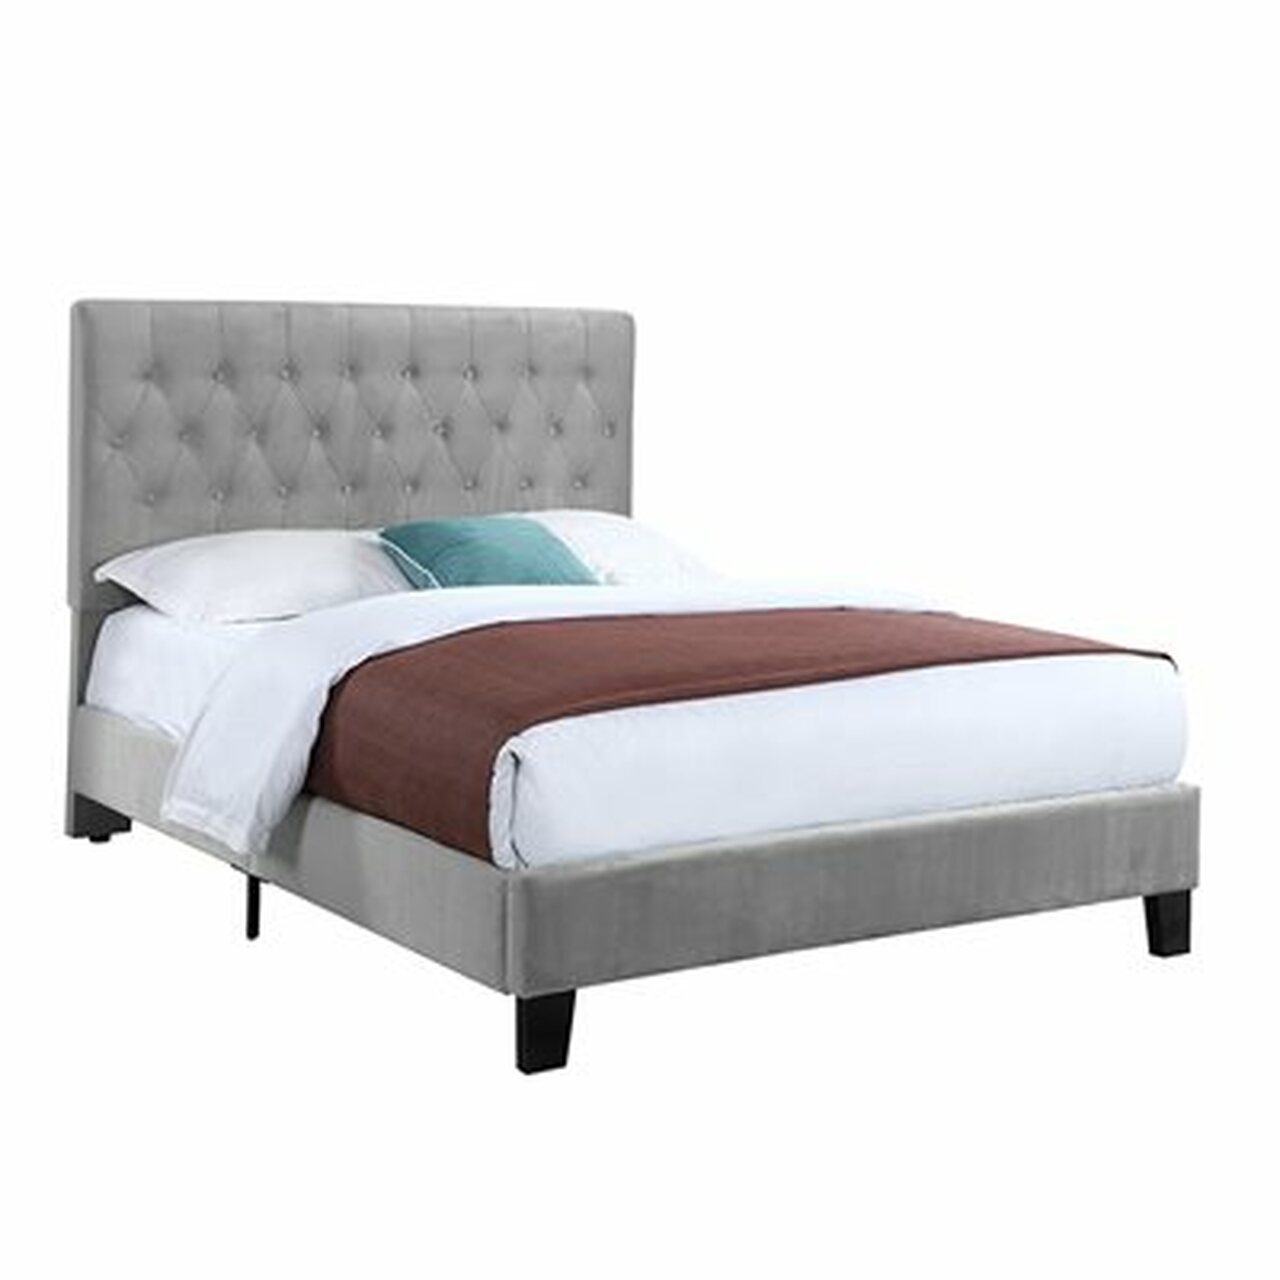 Queen Upholstered Headboard-Footboar-Rails - Light Grey B128-10HBFBR-03 By Emerald Home CL427